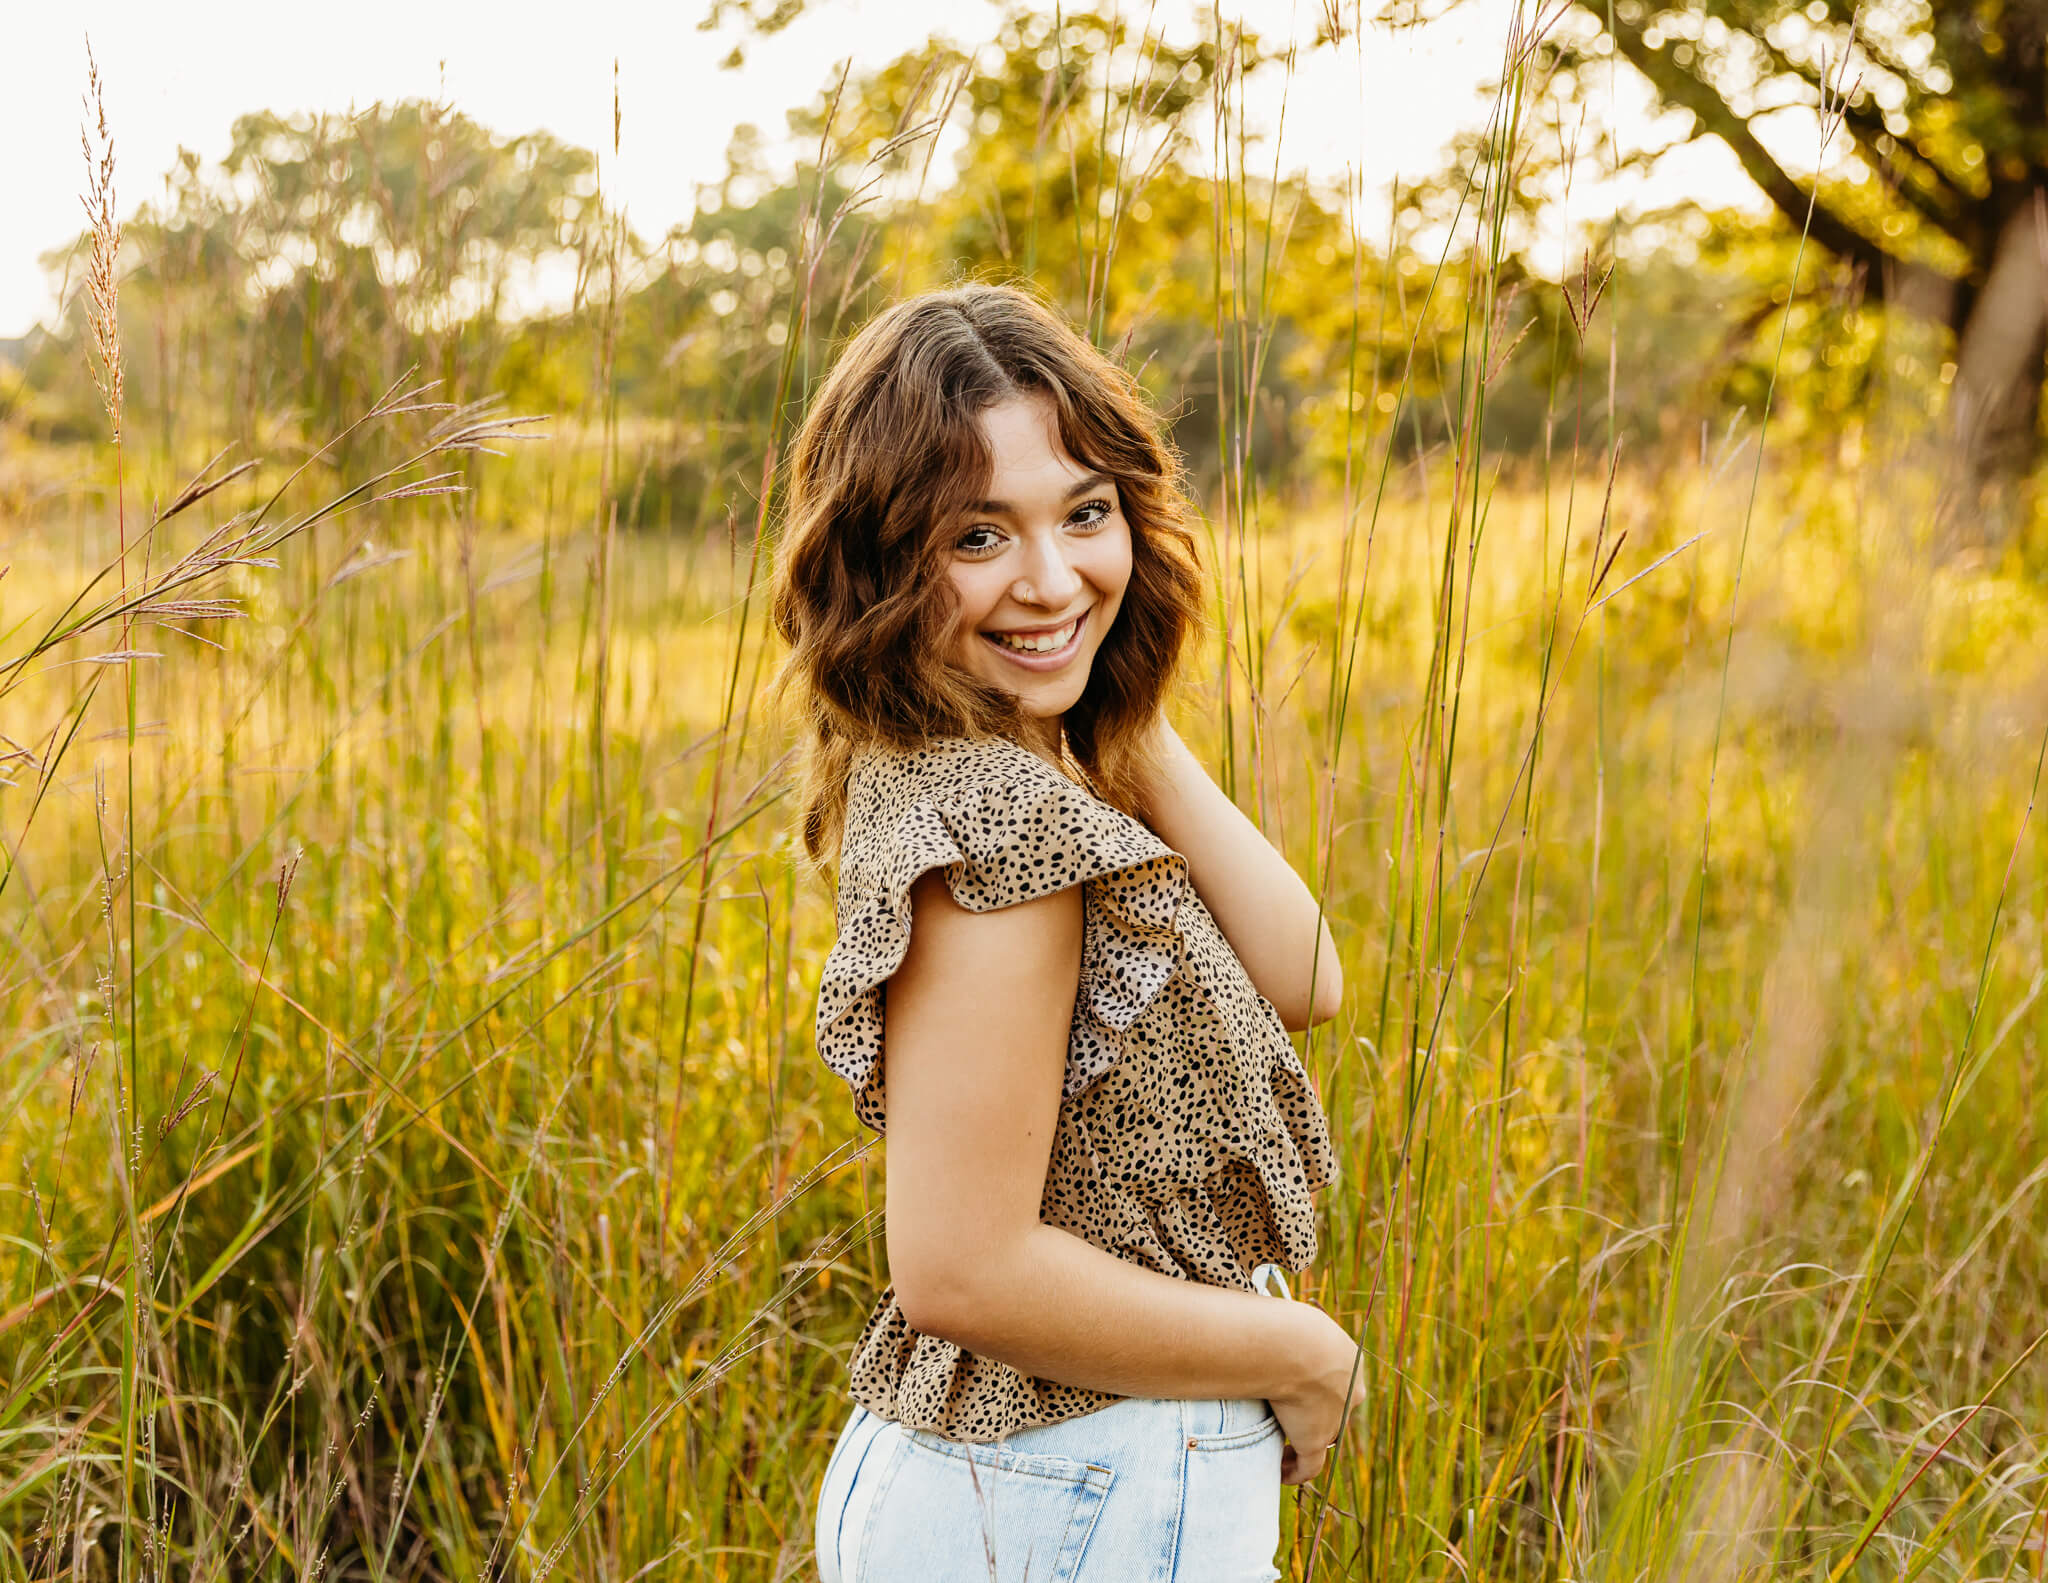 gorgeous high school girl looking back over her shoulder while standing in a glowing field of grass